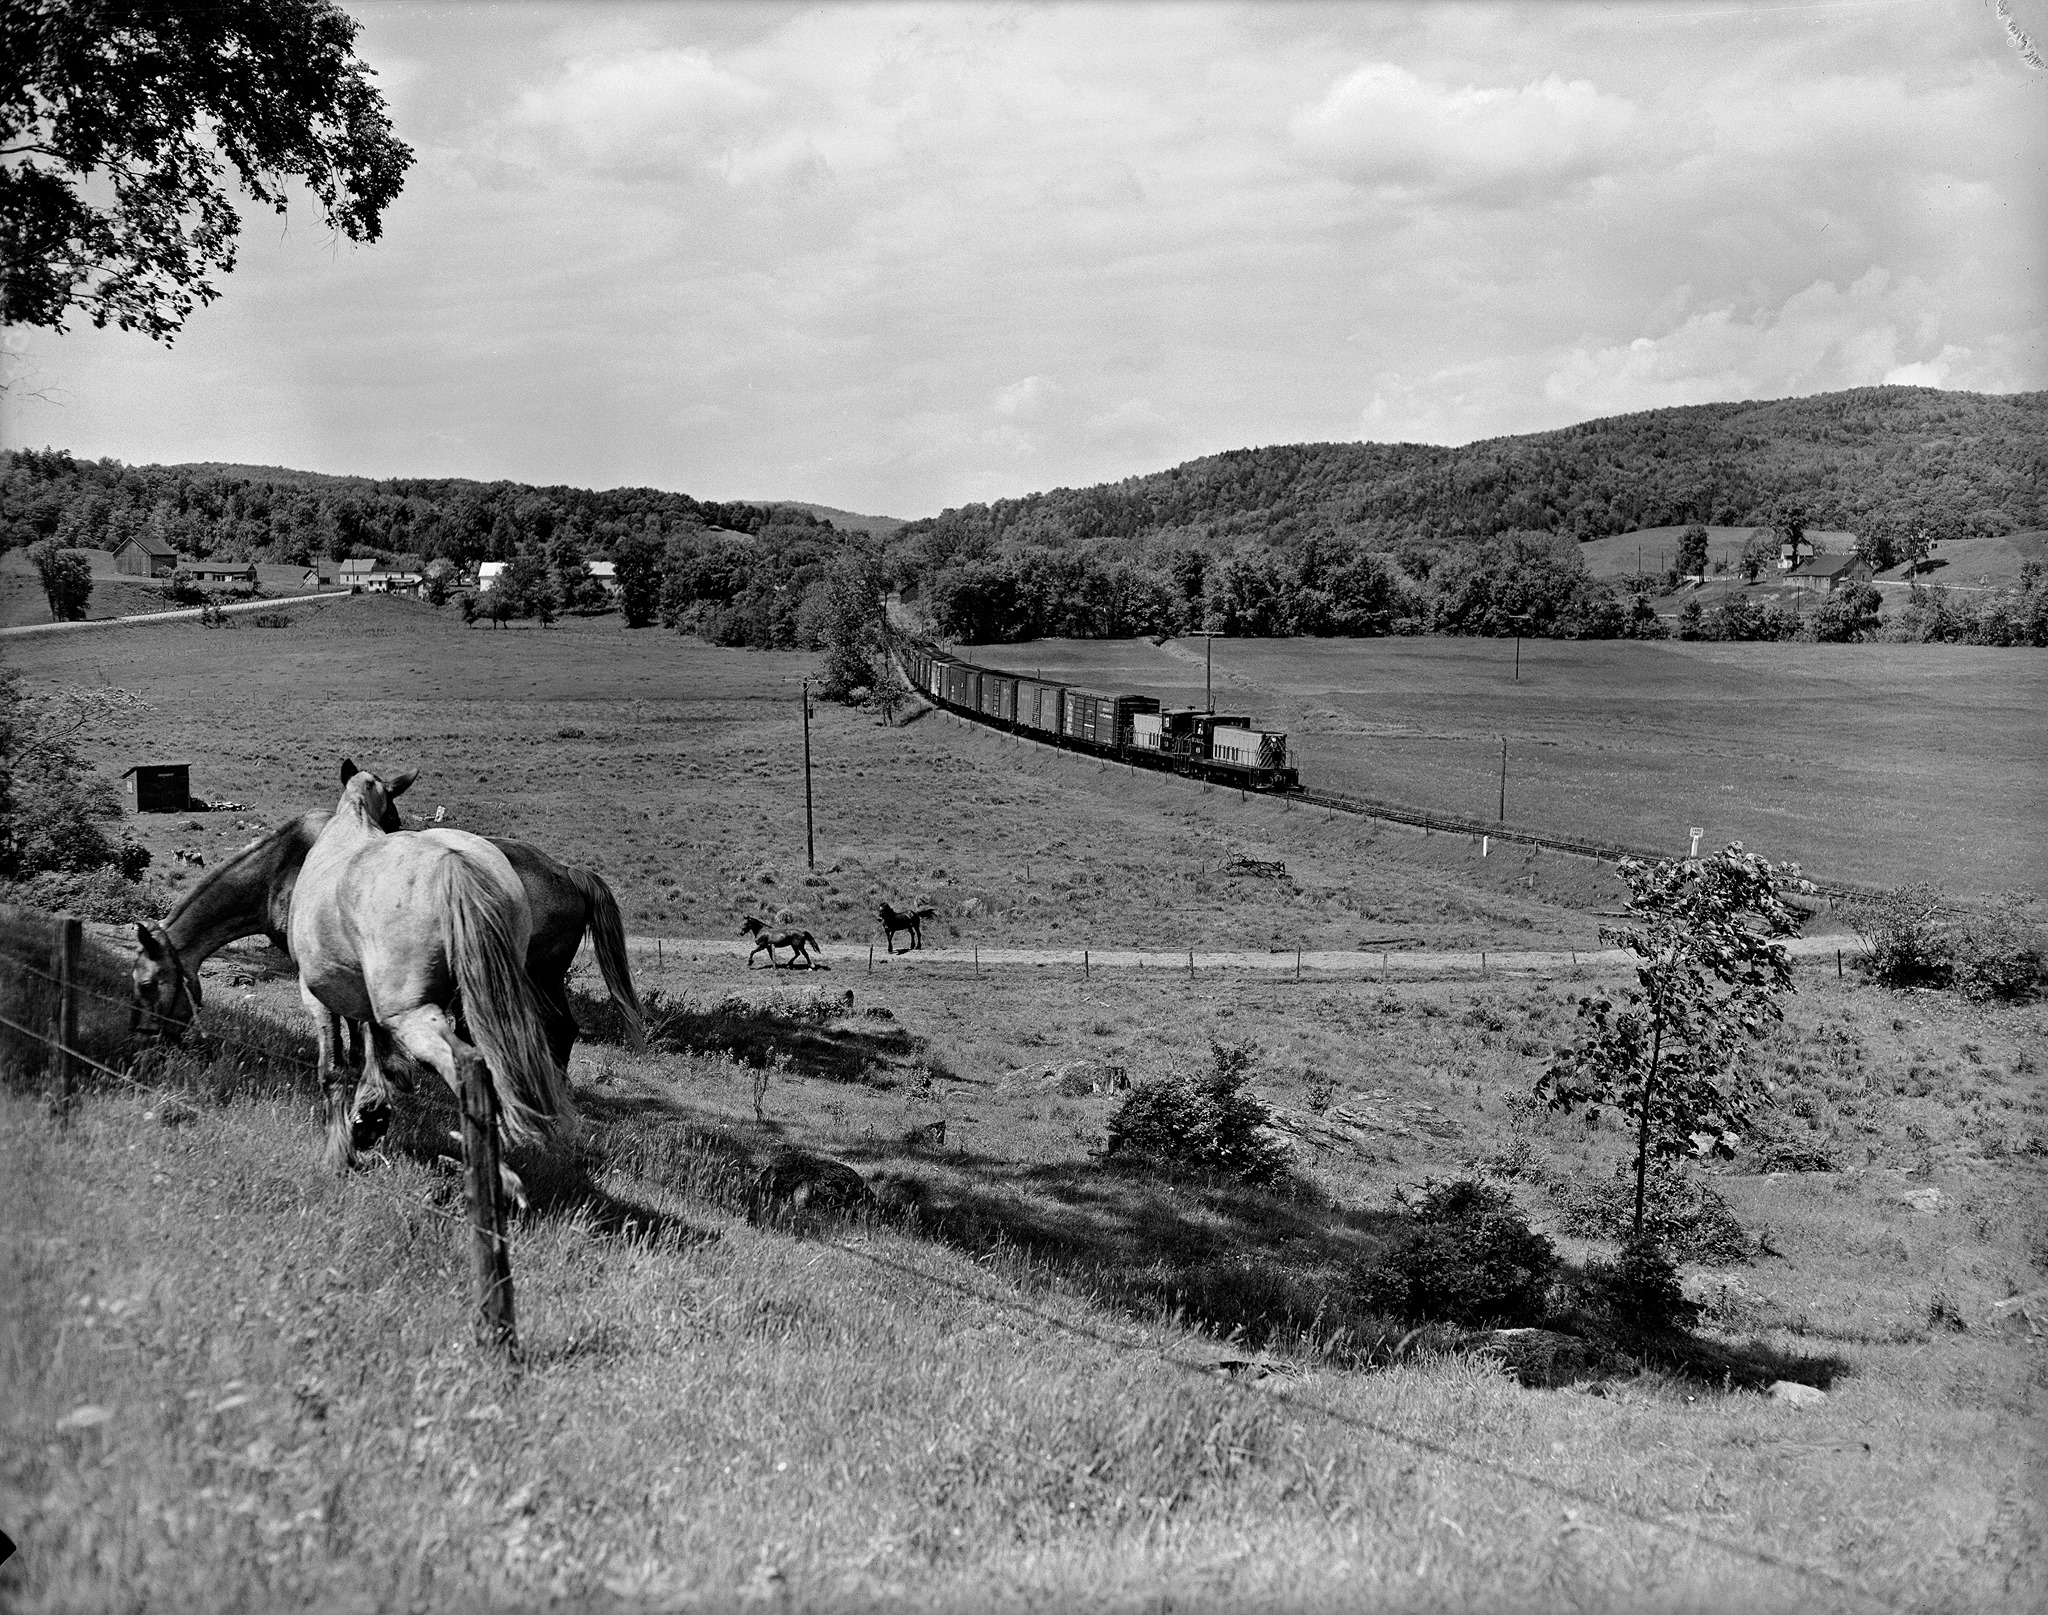 In one of Jim Shaughnessy’s favorite images, the St. Johnsbury & Lamoille County’s daily mixed train #44 rolls east through the Lamoille Valley of northern Vermont on its 96 mile journey to St. Johnsbury, while horses, two choosing to race the train, enjoy one of the lush pastures in the area. The tranquility of their domain will not be disturbed until the same time tomorrow by this lightly traveled shortline railroad. Image shot by Shaughnessy in 1955.